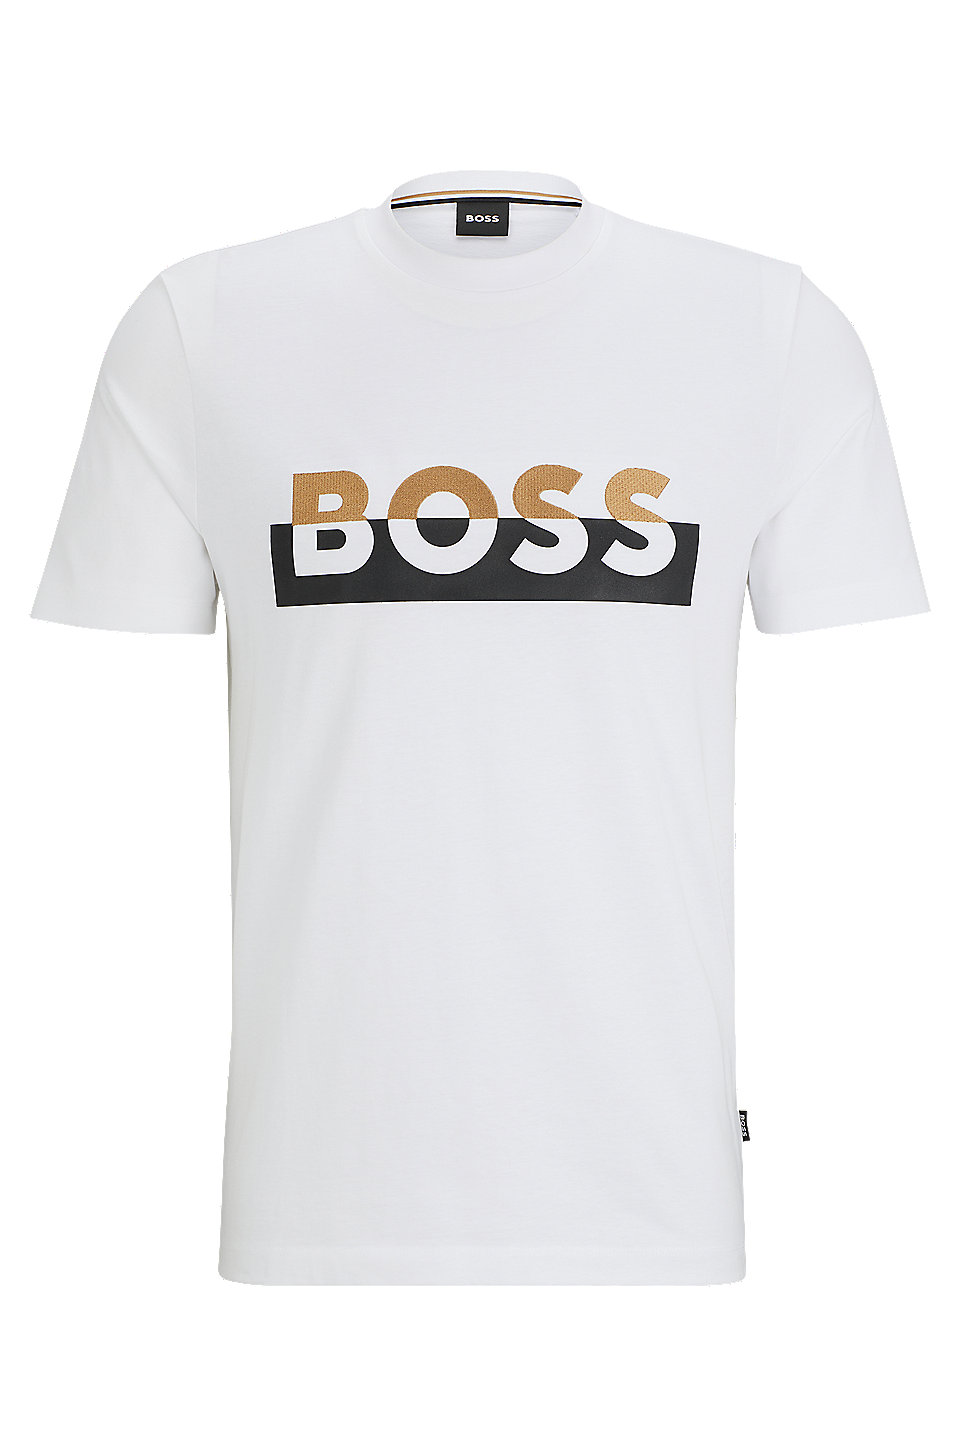 BOSS - Cotton-jersey T-shirt with printed and embroidered branding